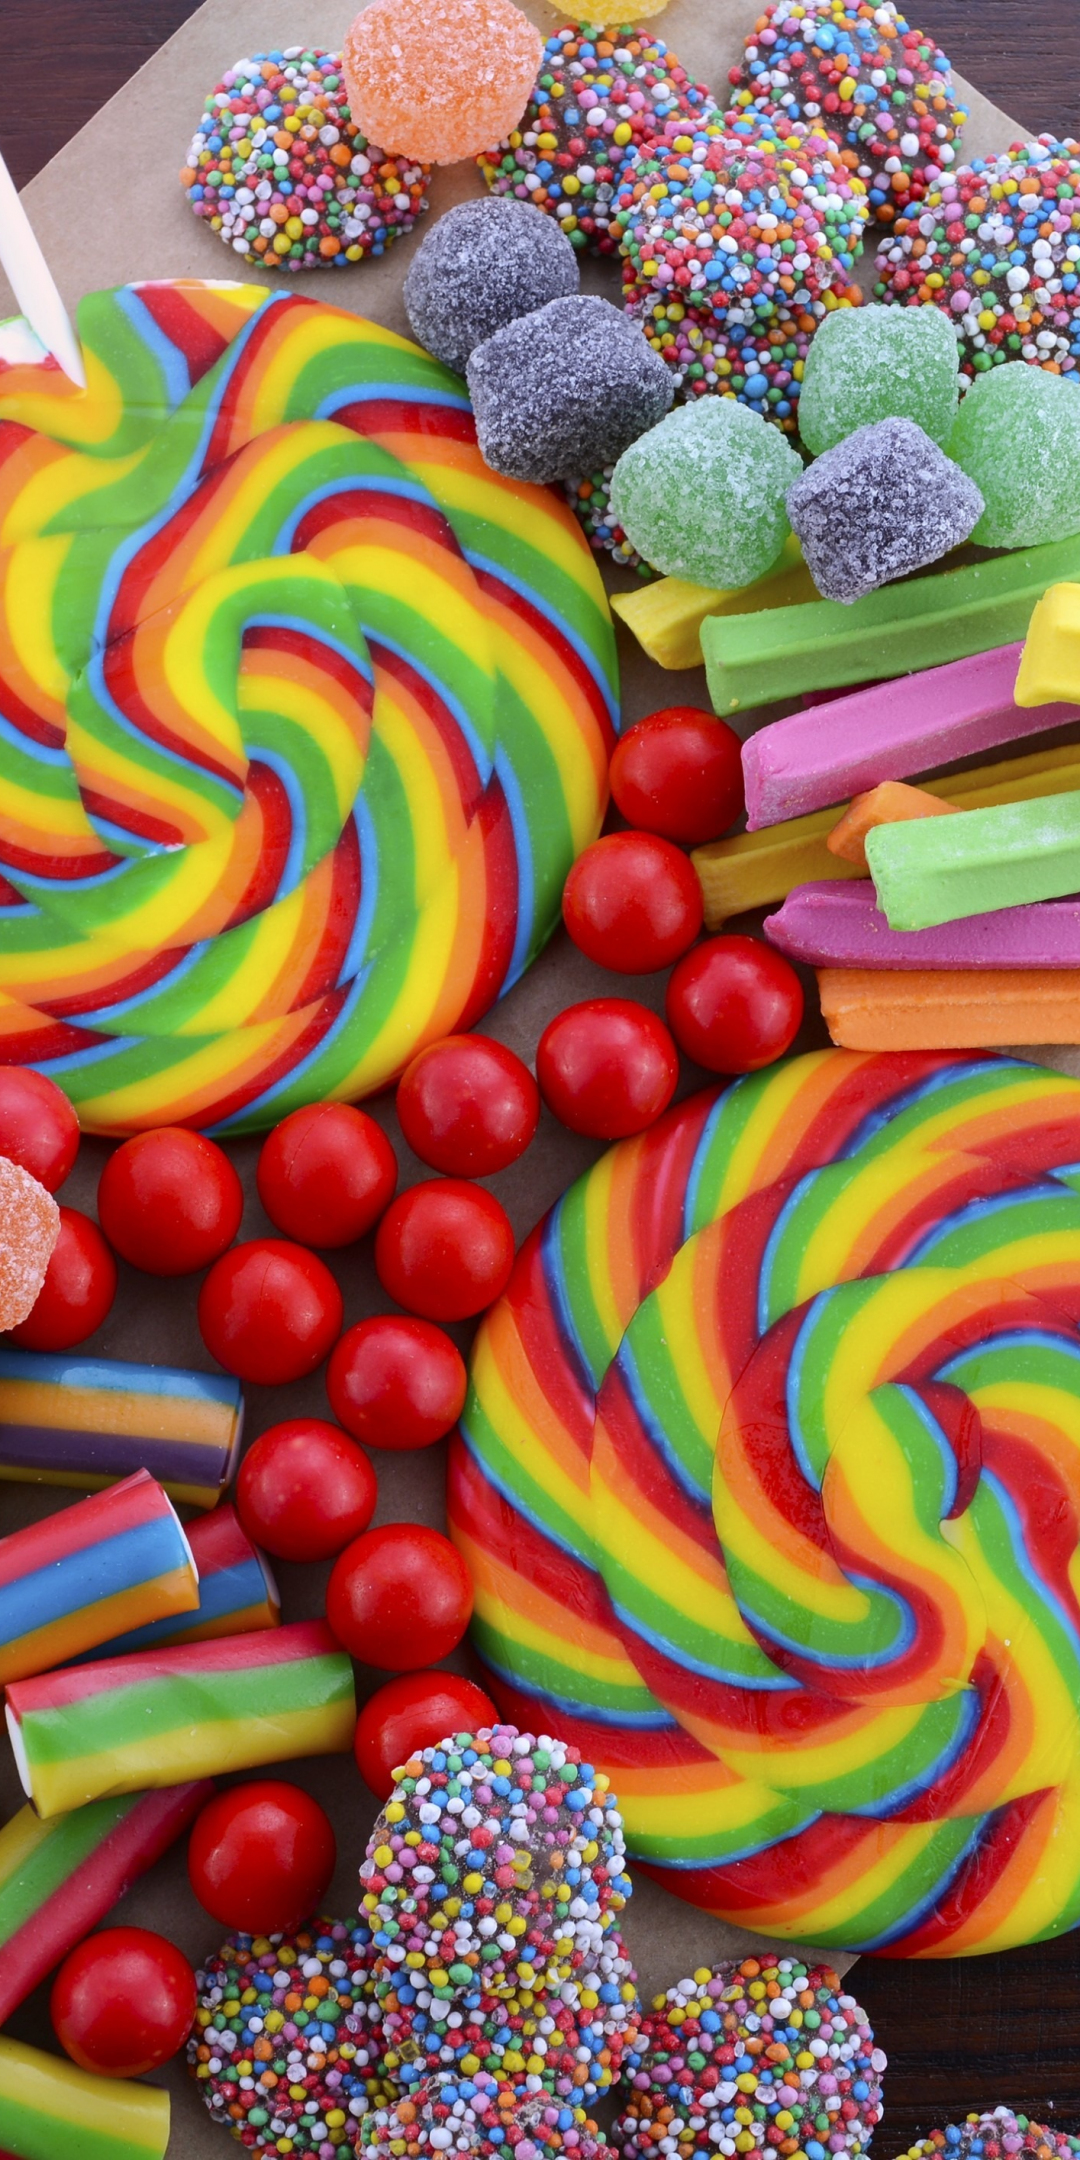 Colorful, candies, sweets, 1080x2160 wallpaper